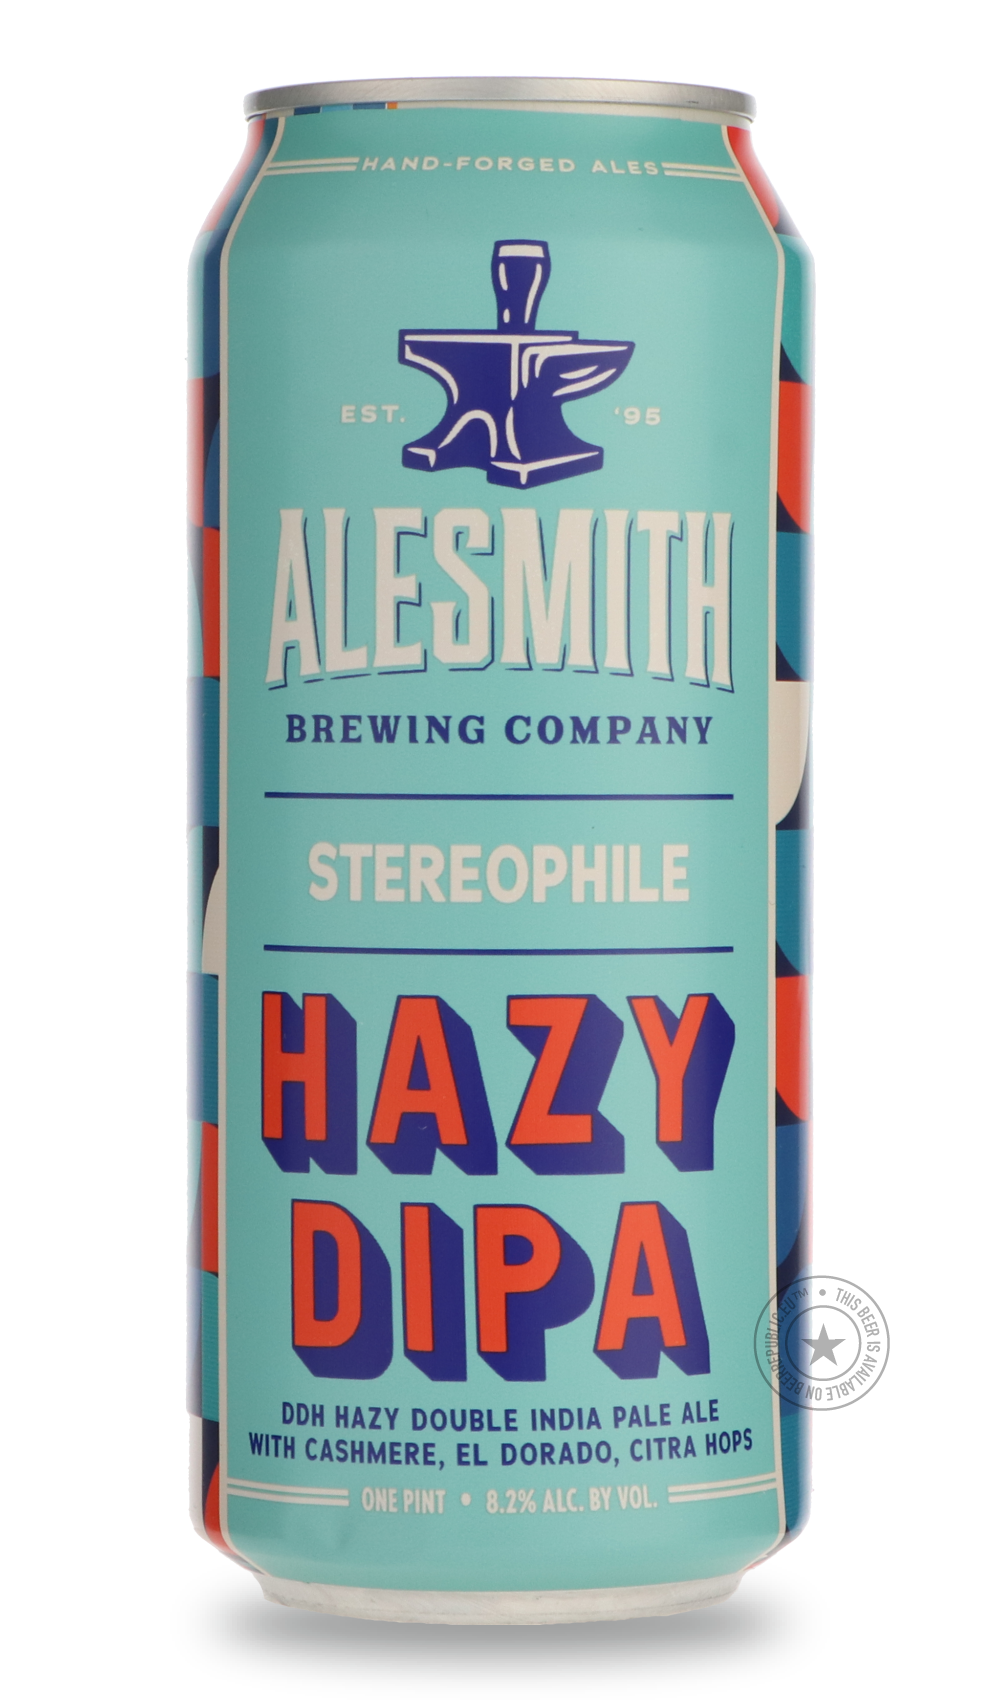 -AleSmith- Stereophile-IPA- Only @ Beer Republic - The best online beer store for American & Canadian craft beer - Buy beer online from the USA and Canada - Bier online kopen - Amerikaans bier kopen - Craft beer store - Craft beer kopen - Amerikanisch bier kaufen - Bier online kaufen - Acheter biere online - IPA - Stout - Porter - New England IPA - Hazy IPA - Imperial Stout - Barrel Aged - Barrel Aged Imperial Stout - Brown - Dark beer - Blond - Blonde - Pilsner - Lager - Wheat - Weizen - Amber - Barley Win